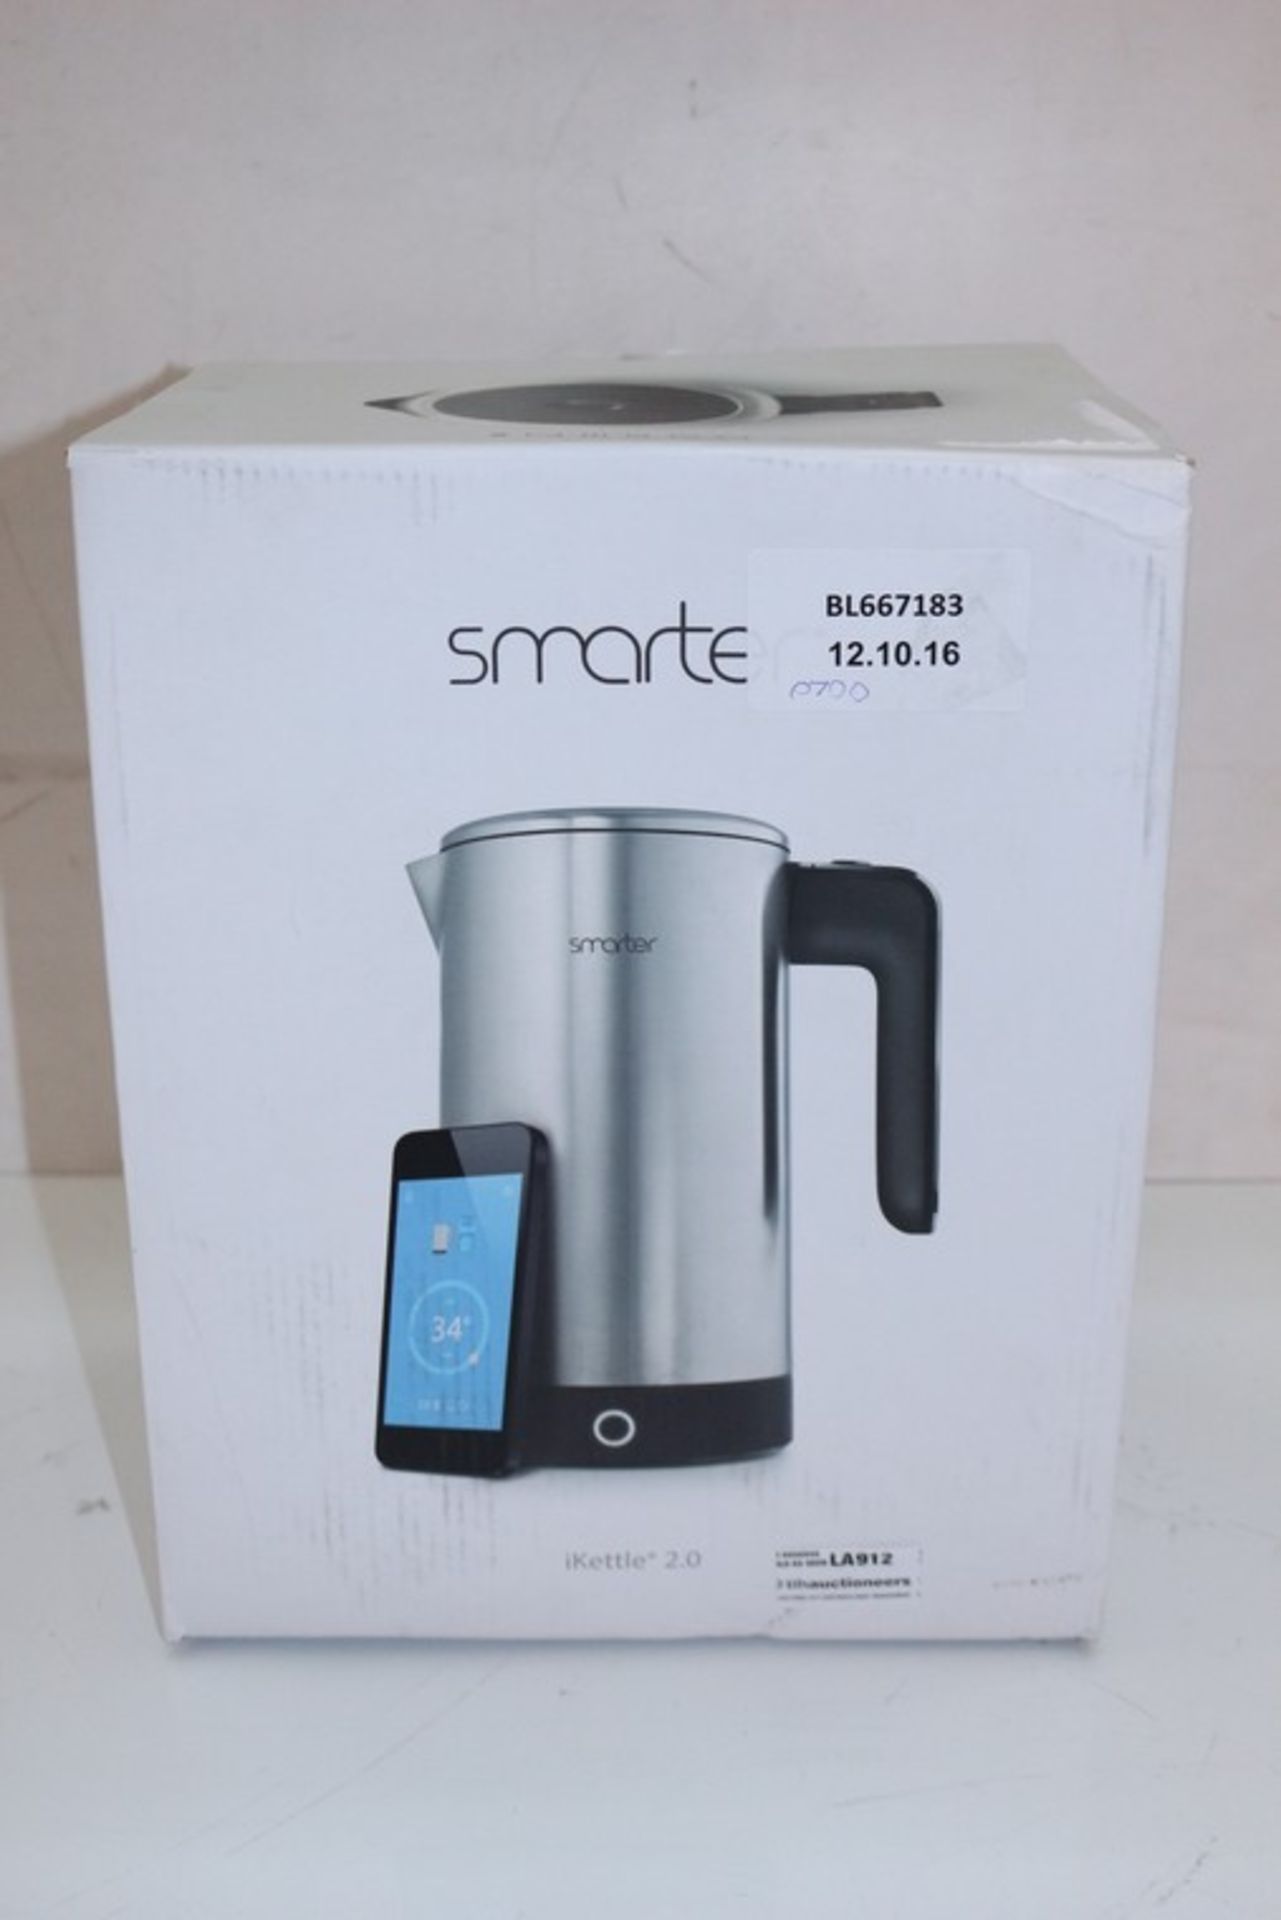 1 x BOXED SMARTER 2L I-KETTLE WIFI KETTLE RRP £70 *PLEASE NOTE THAT THE BID PRICE IS MULTIPLIED BY